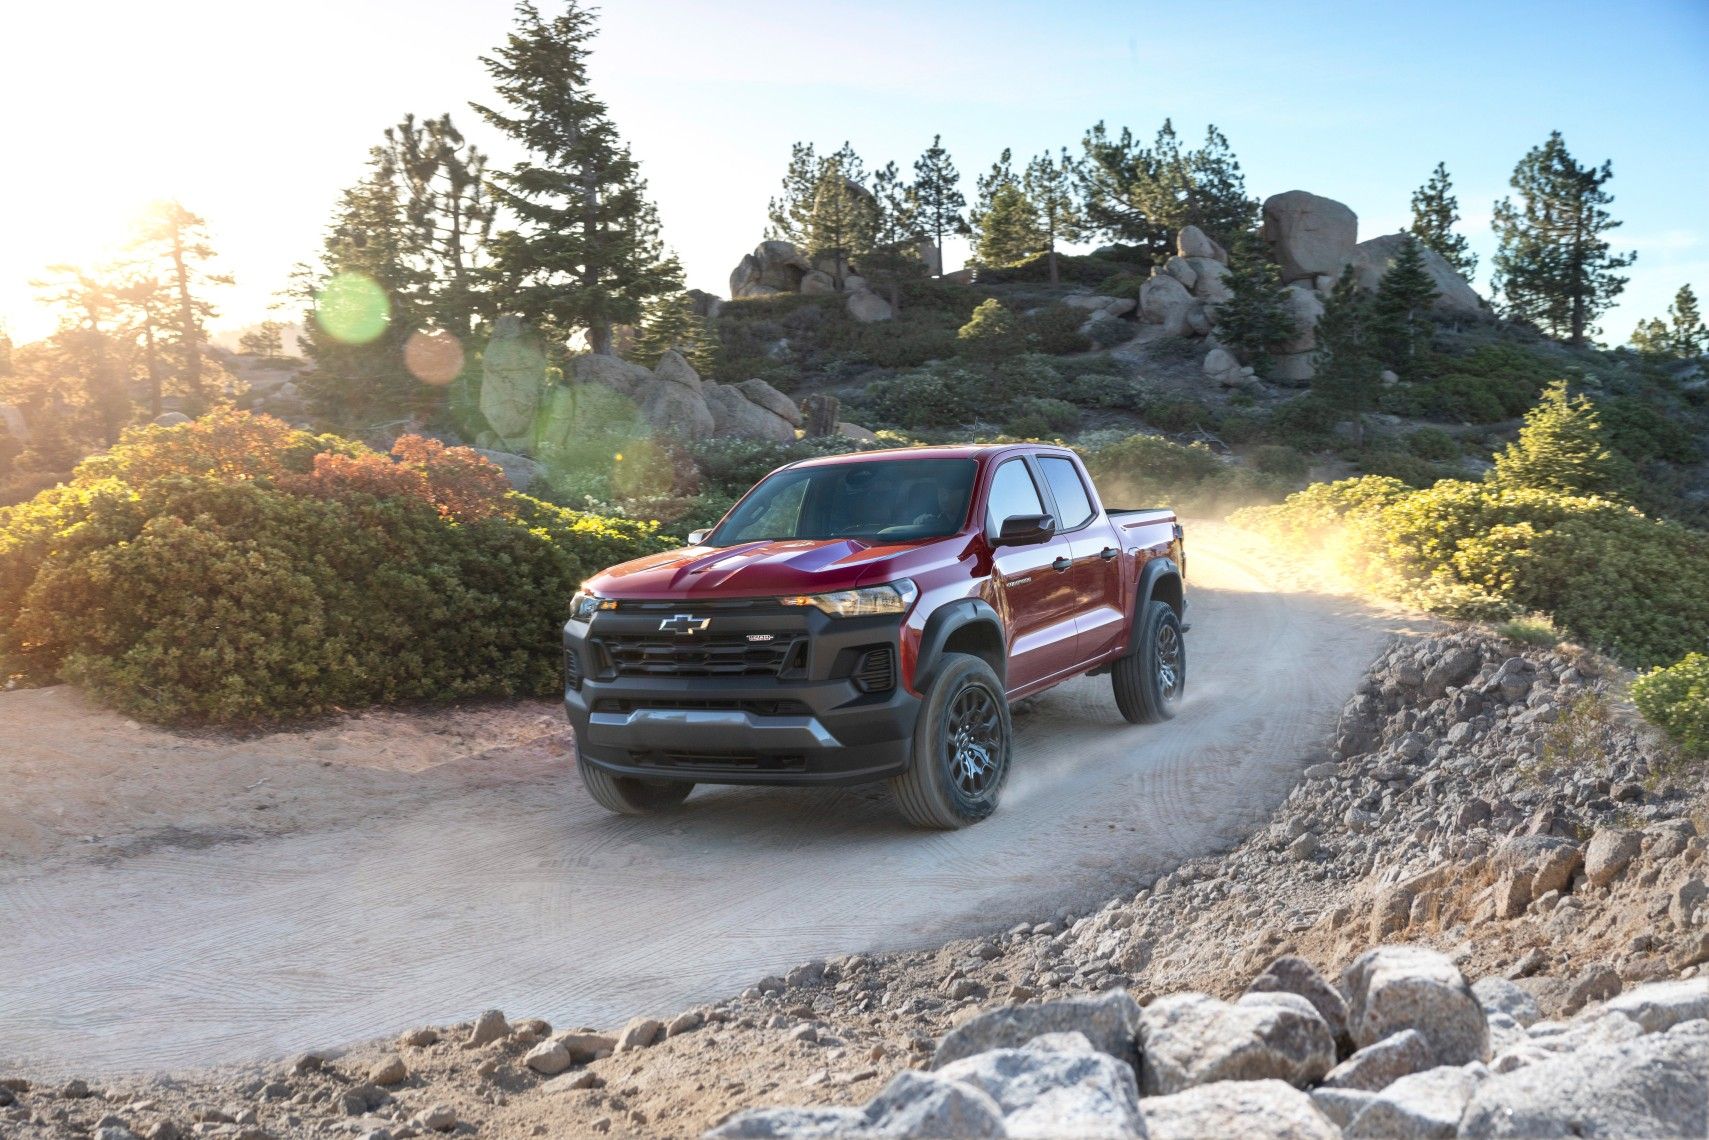 2023 Chevrolet Colorado Trail Boss Driving Around A Curve